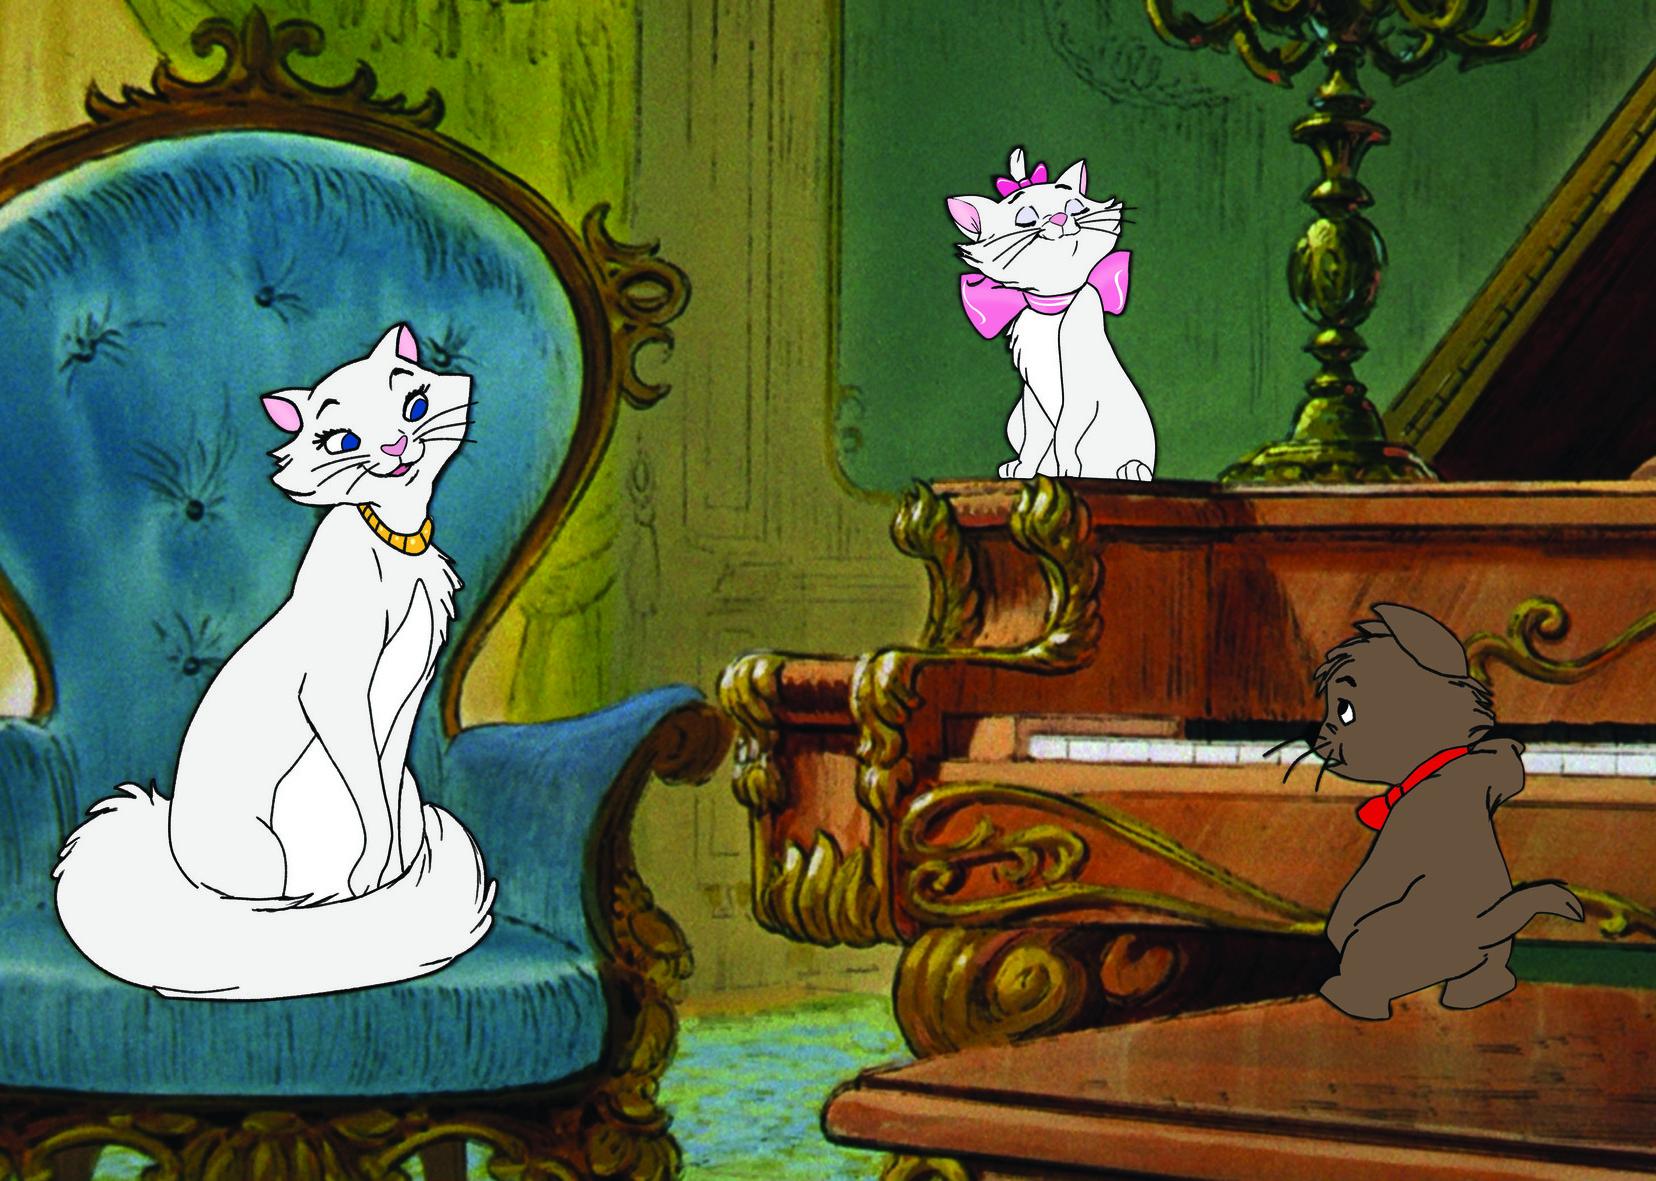 Two white cats listen to a small brown cat play the piano.